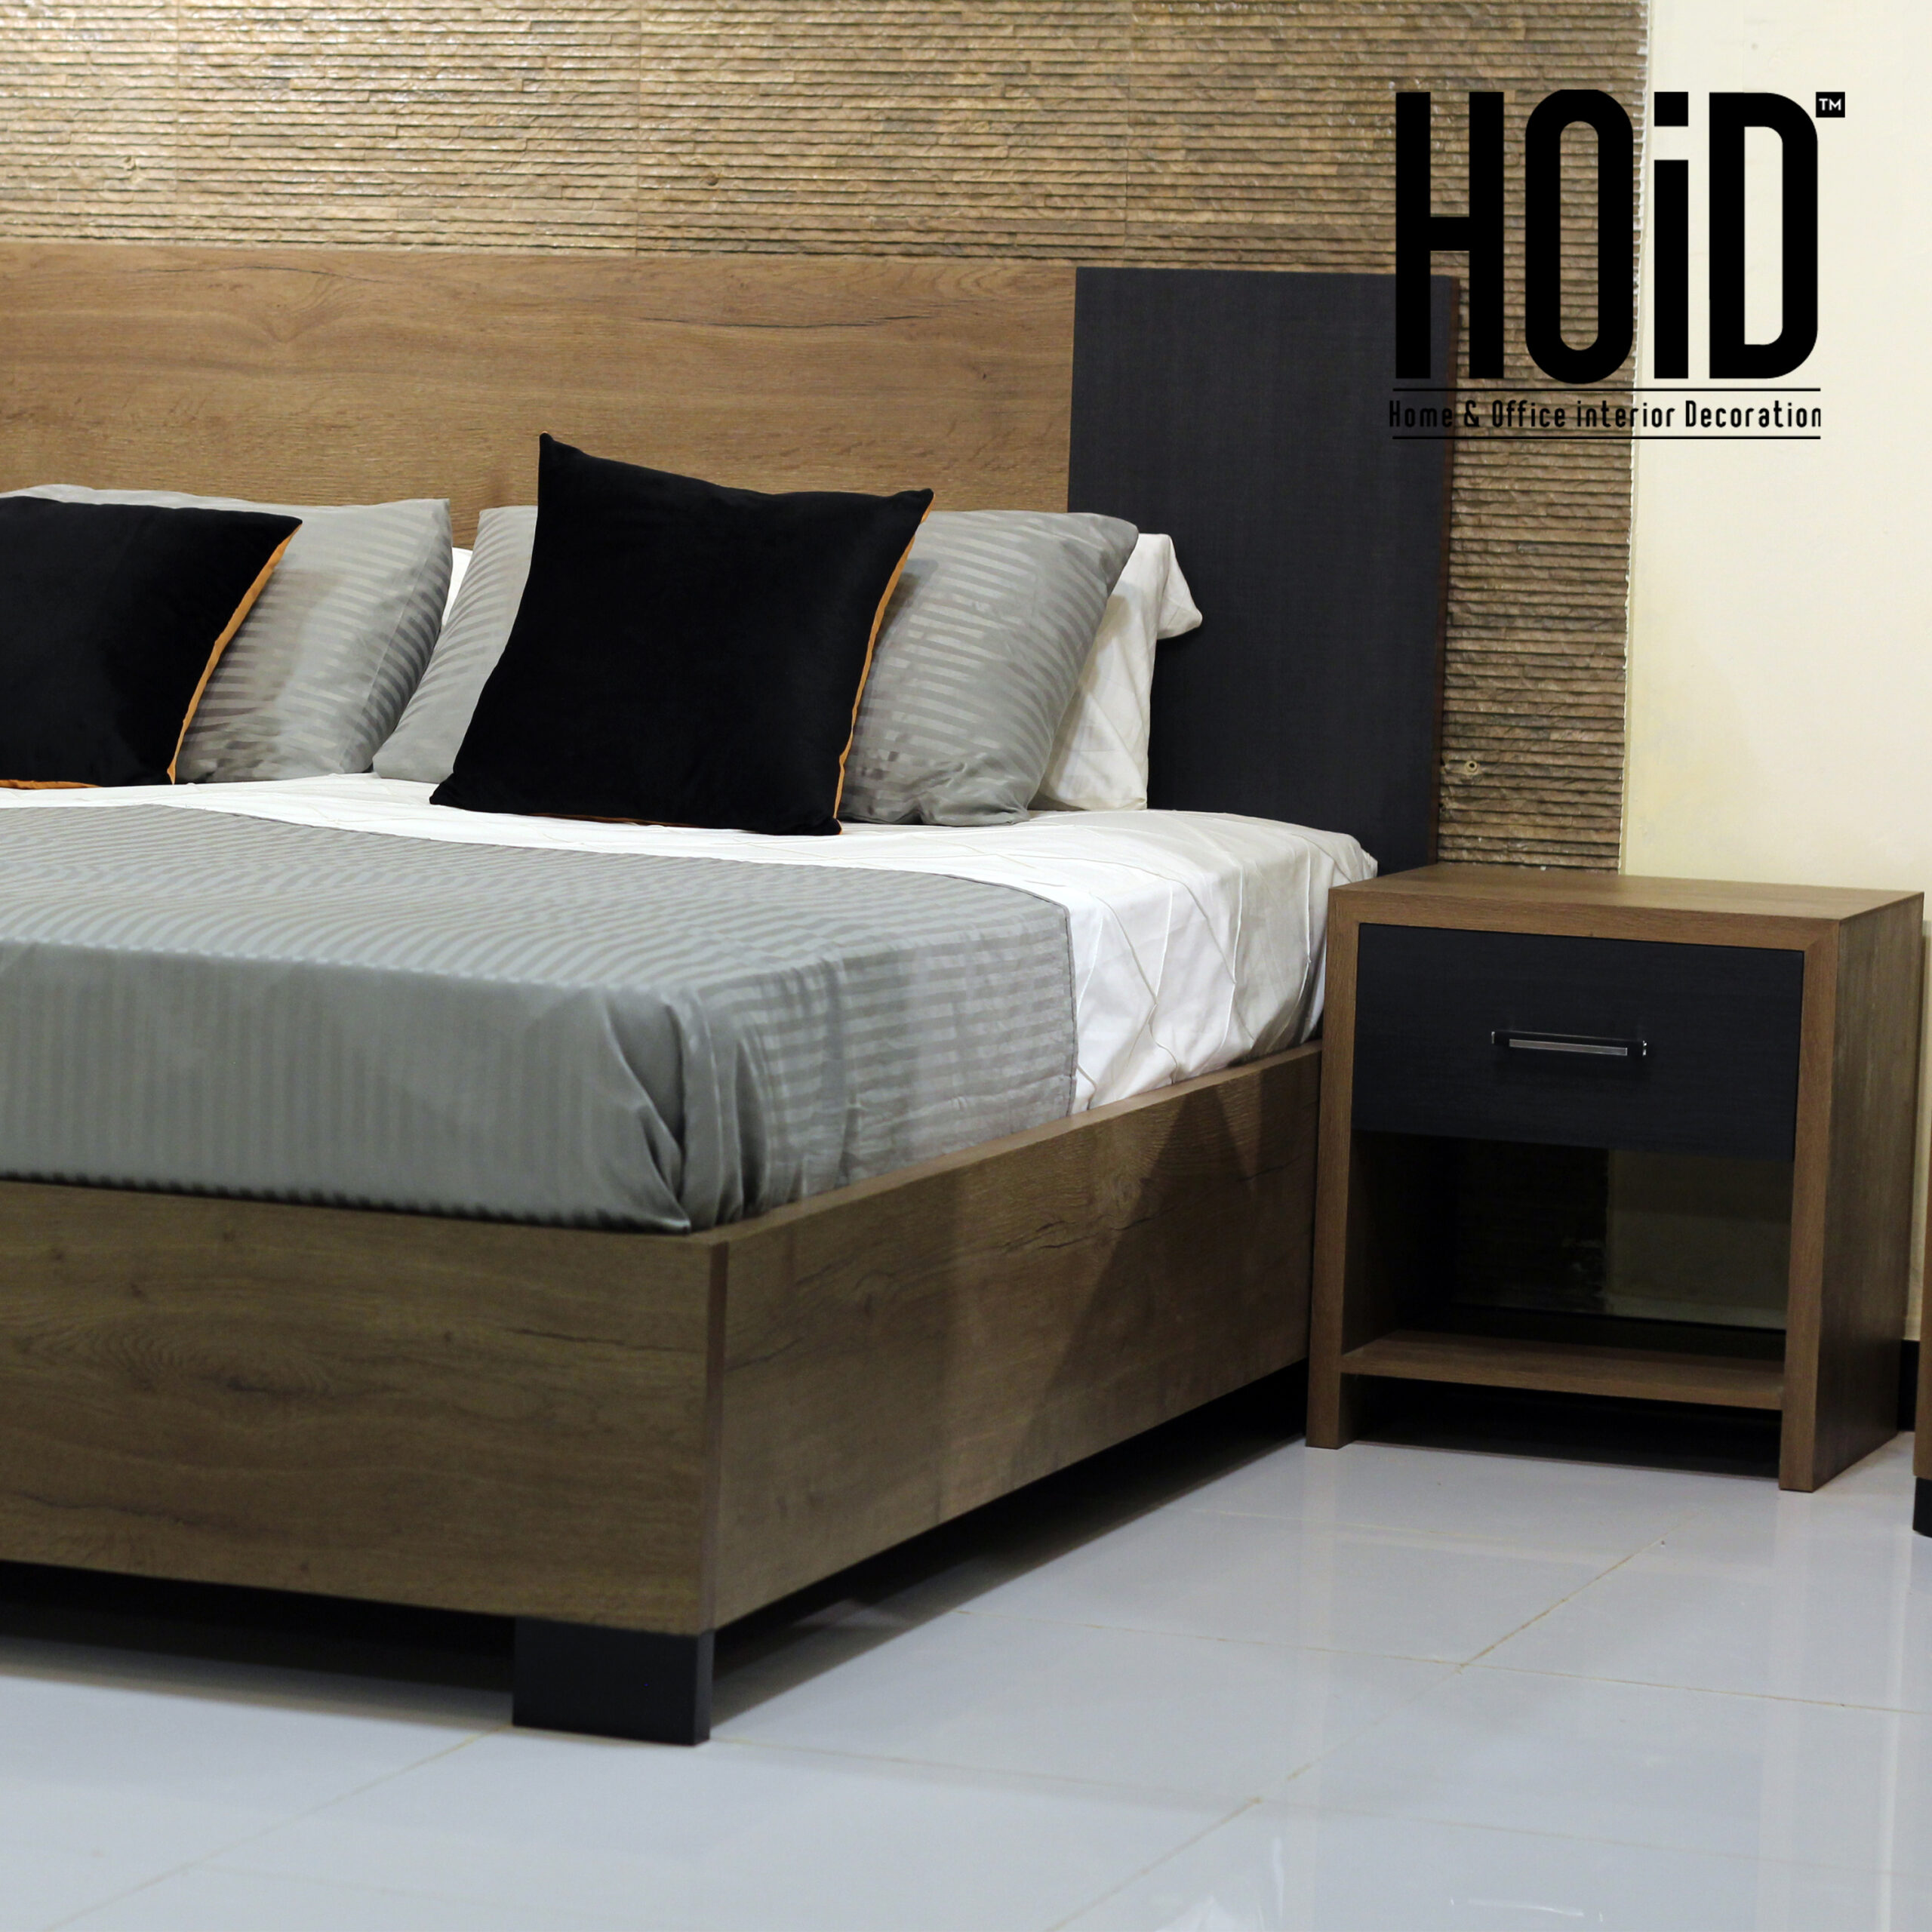 high-bed-with-2-side-tables-scaled-2.jpg